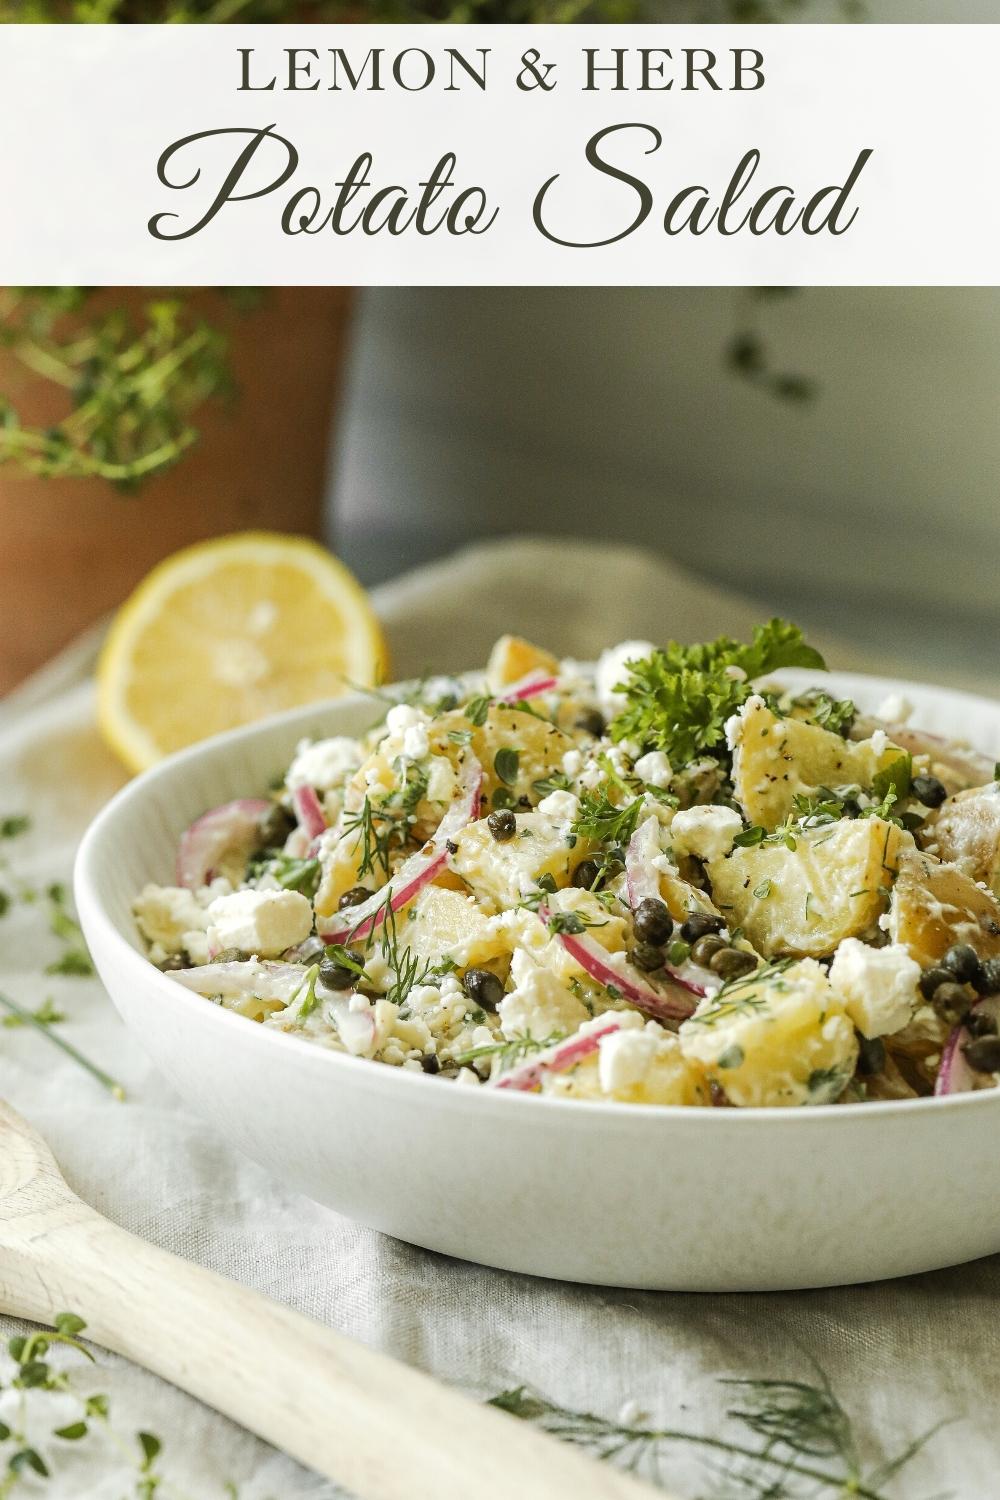 Lemon & Herb Potato Salad with dill and capers